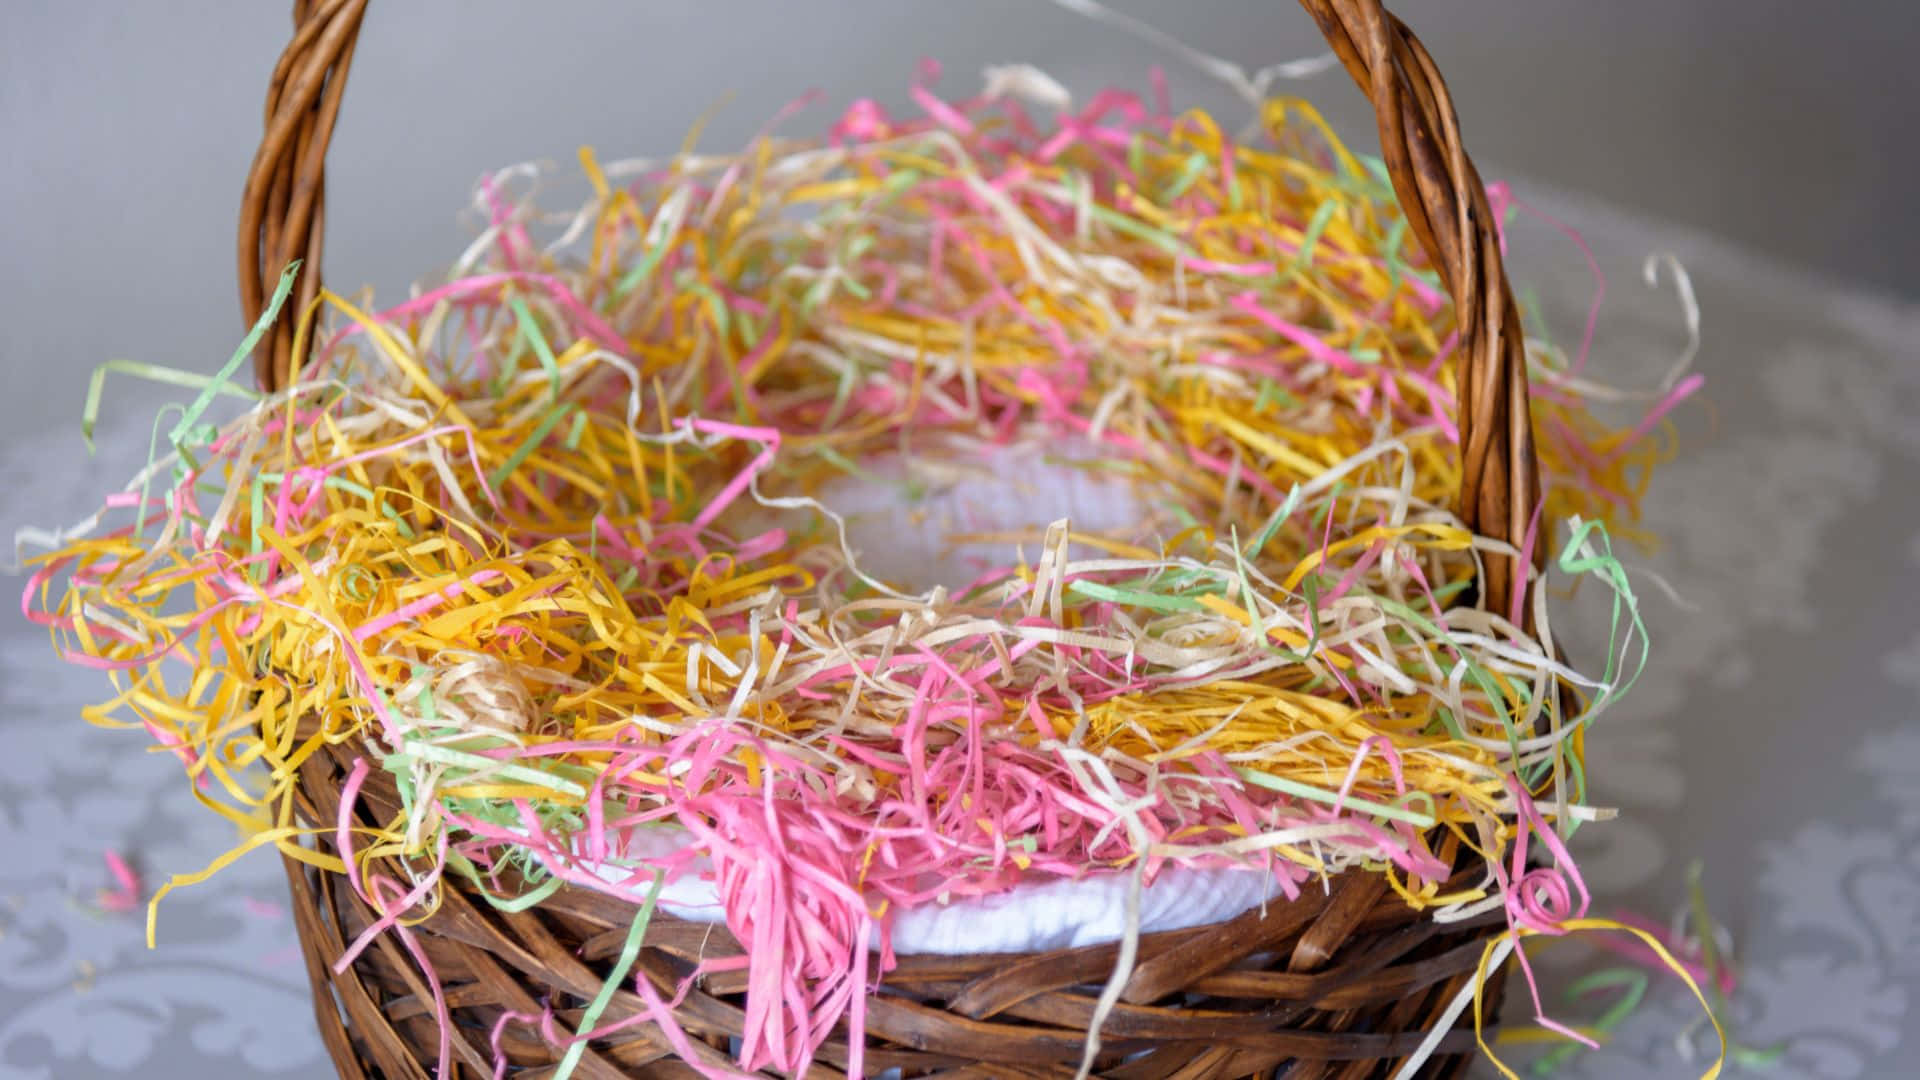 Celebrate Easter with a colorful basket full of treats. Wallpaper